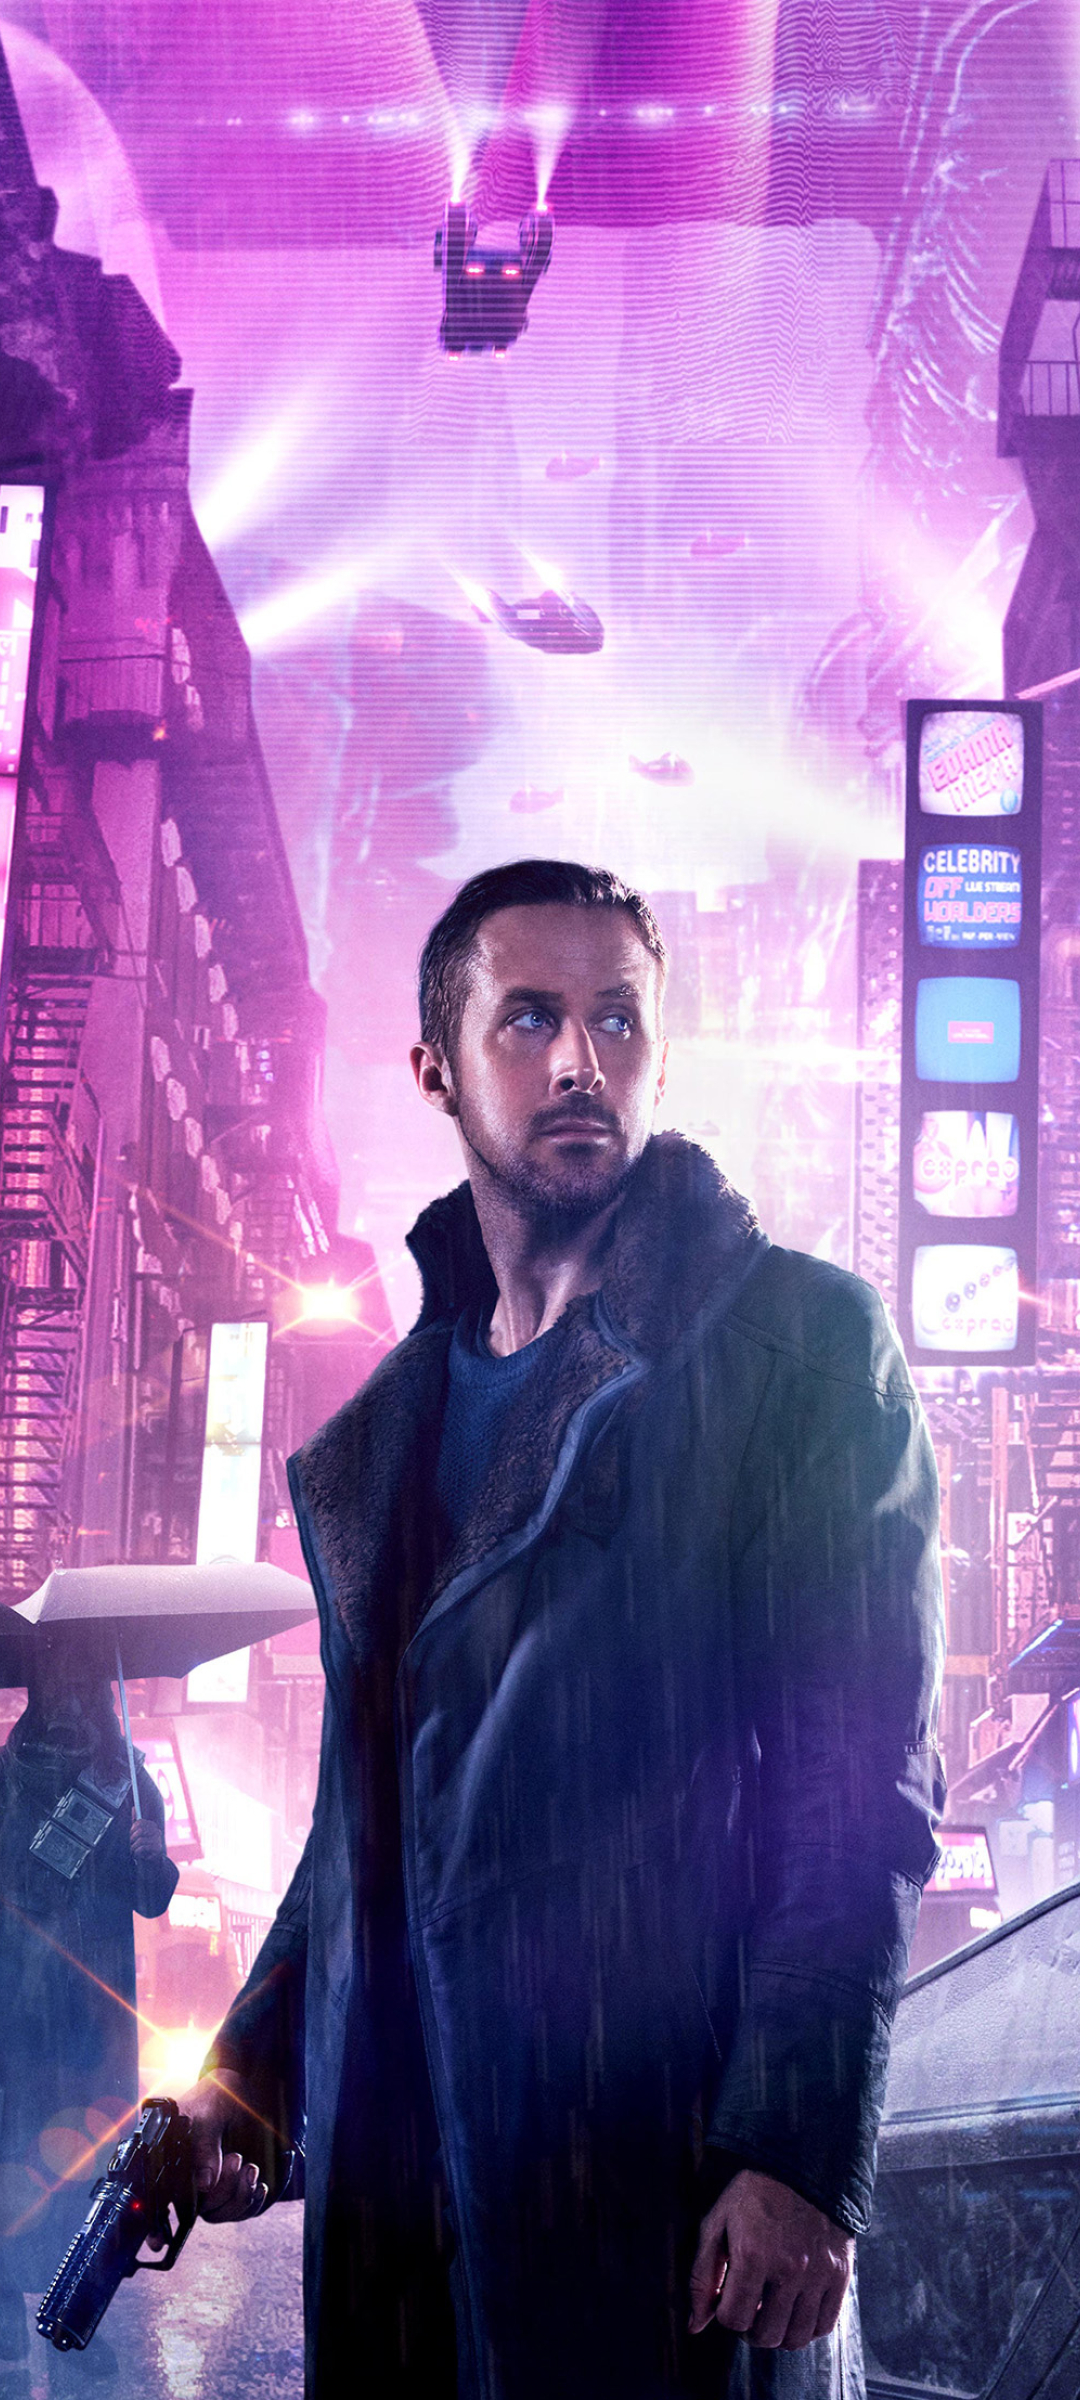 1080x2400 Blade Runner 49 Movie 1080x2400 Resolution Wallpaper Hd Movies 4k Wallpapers Images Photos And Background Wallpapers Den